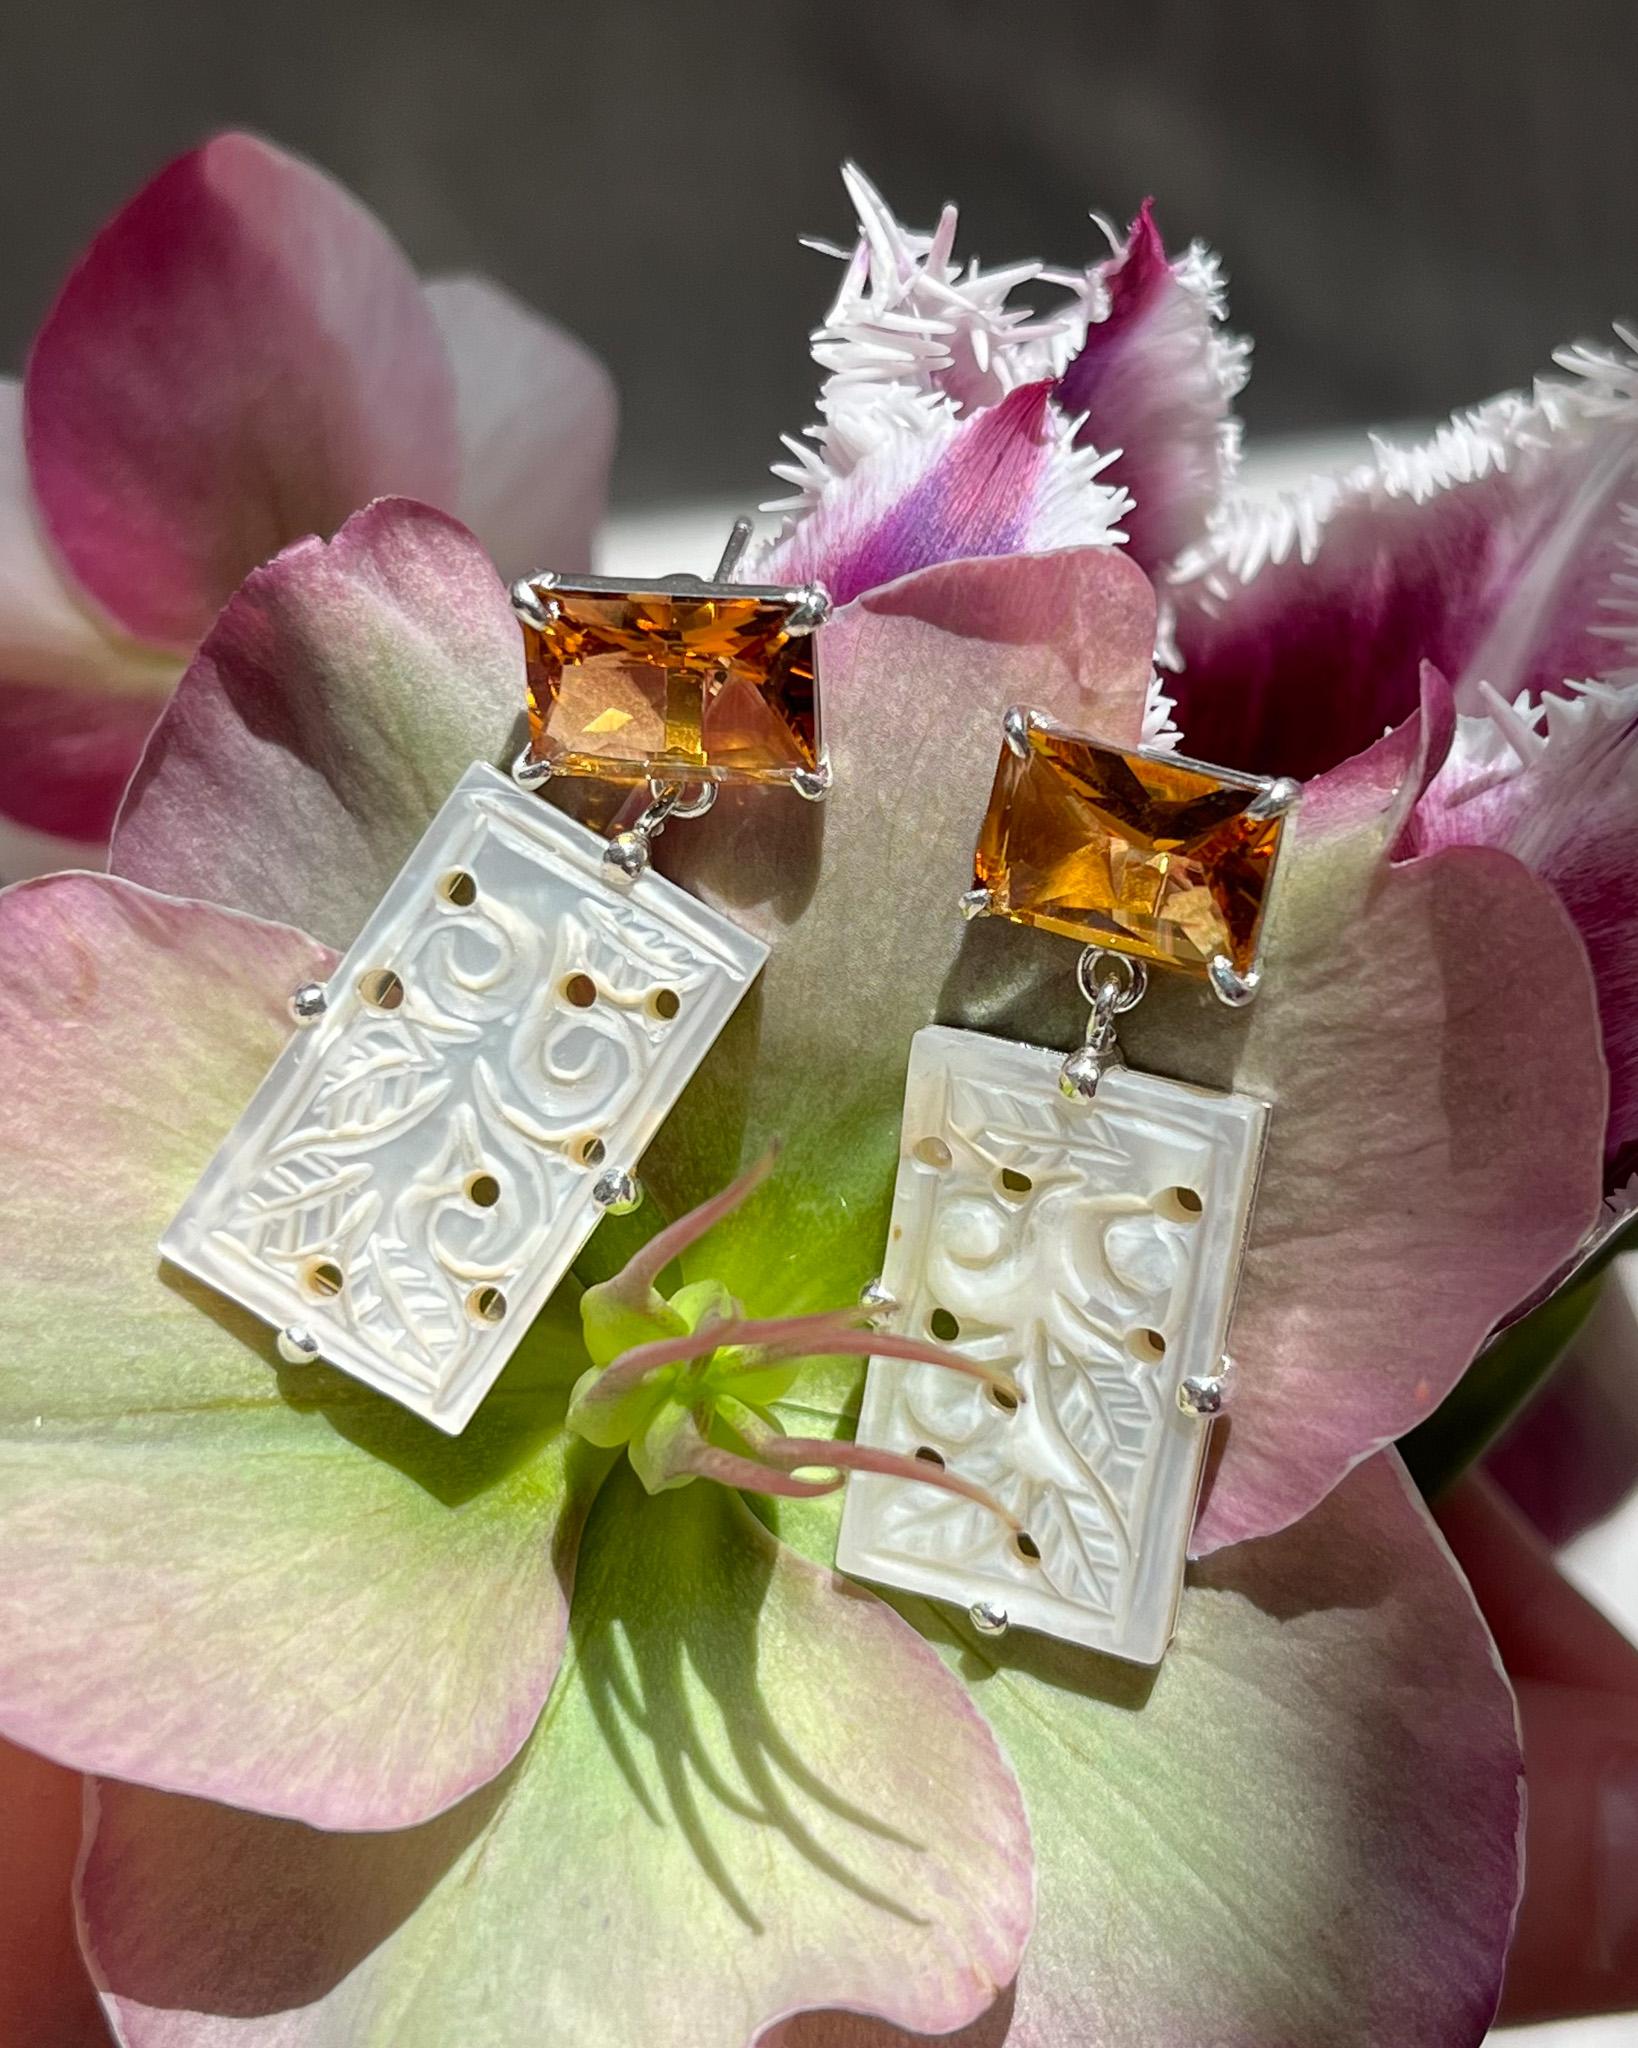 Intention: Opening doors

Design: Small yet packing a big punch, these glowing dangle earrings are perfect for spring. Fresh emerald-cut orange quartz and floral, iridescent hand-cut mother of pearl remind us that new doors are always opening.